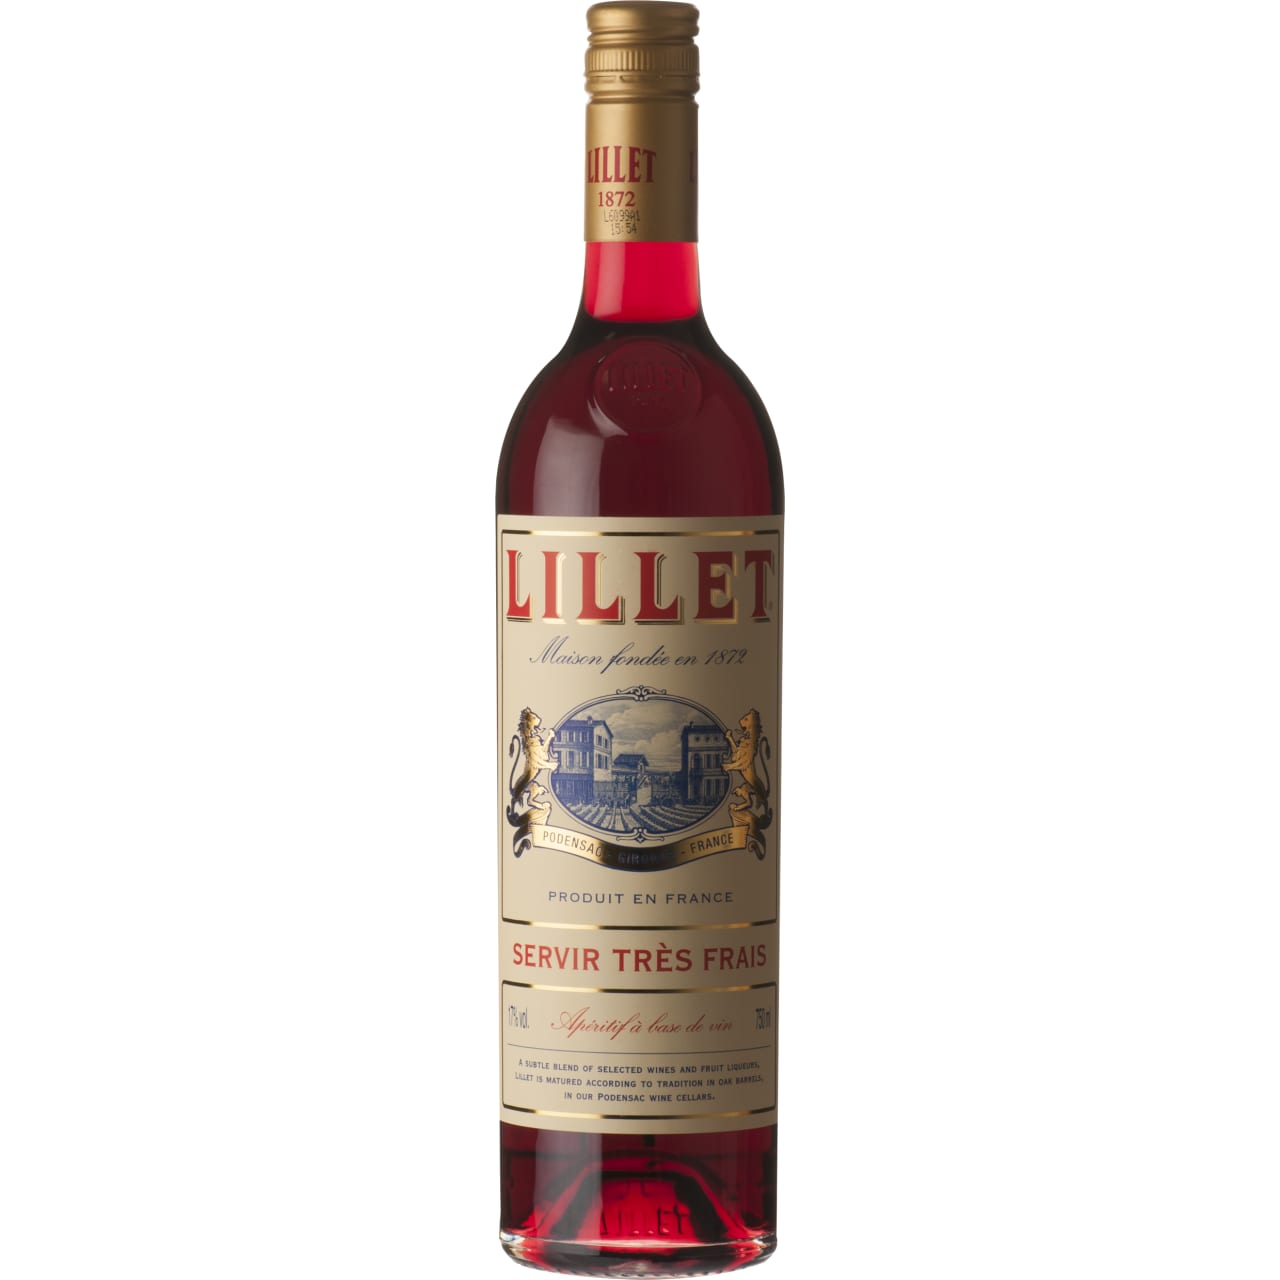 Lillet Rouge is a subtle blend of carefully selected wines (Merlot and Cabernot Sauvignon) and fruit and Quinquina infusions.